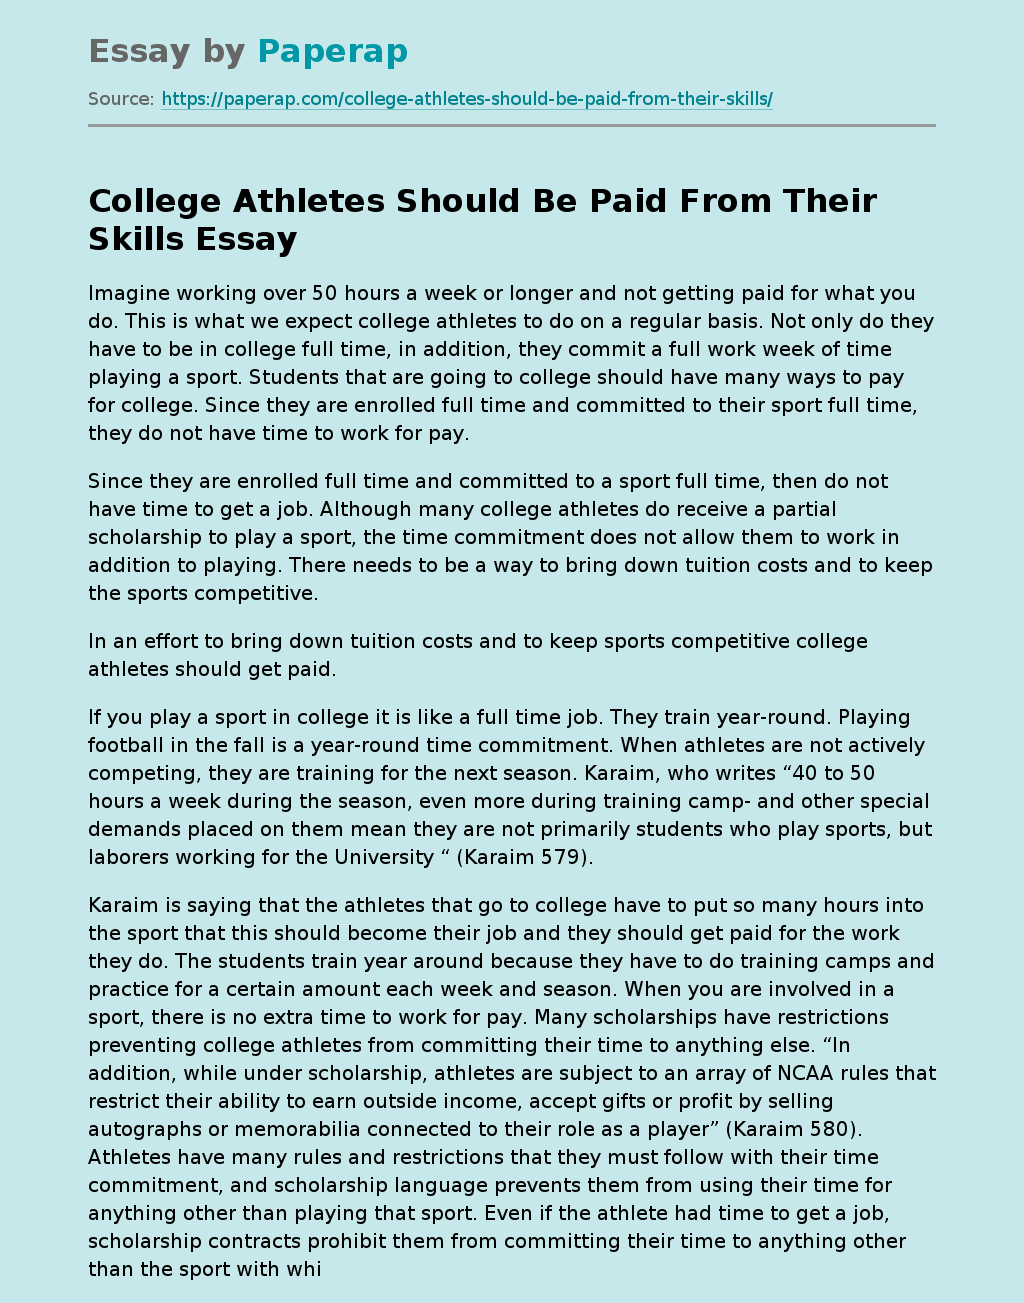 essay on college athletes getting paid